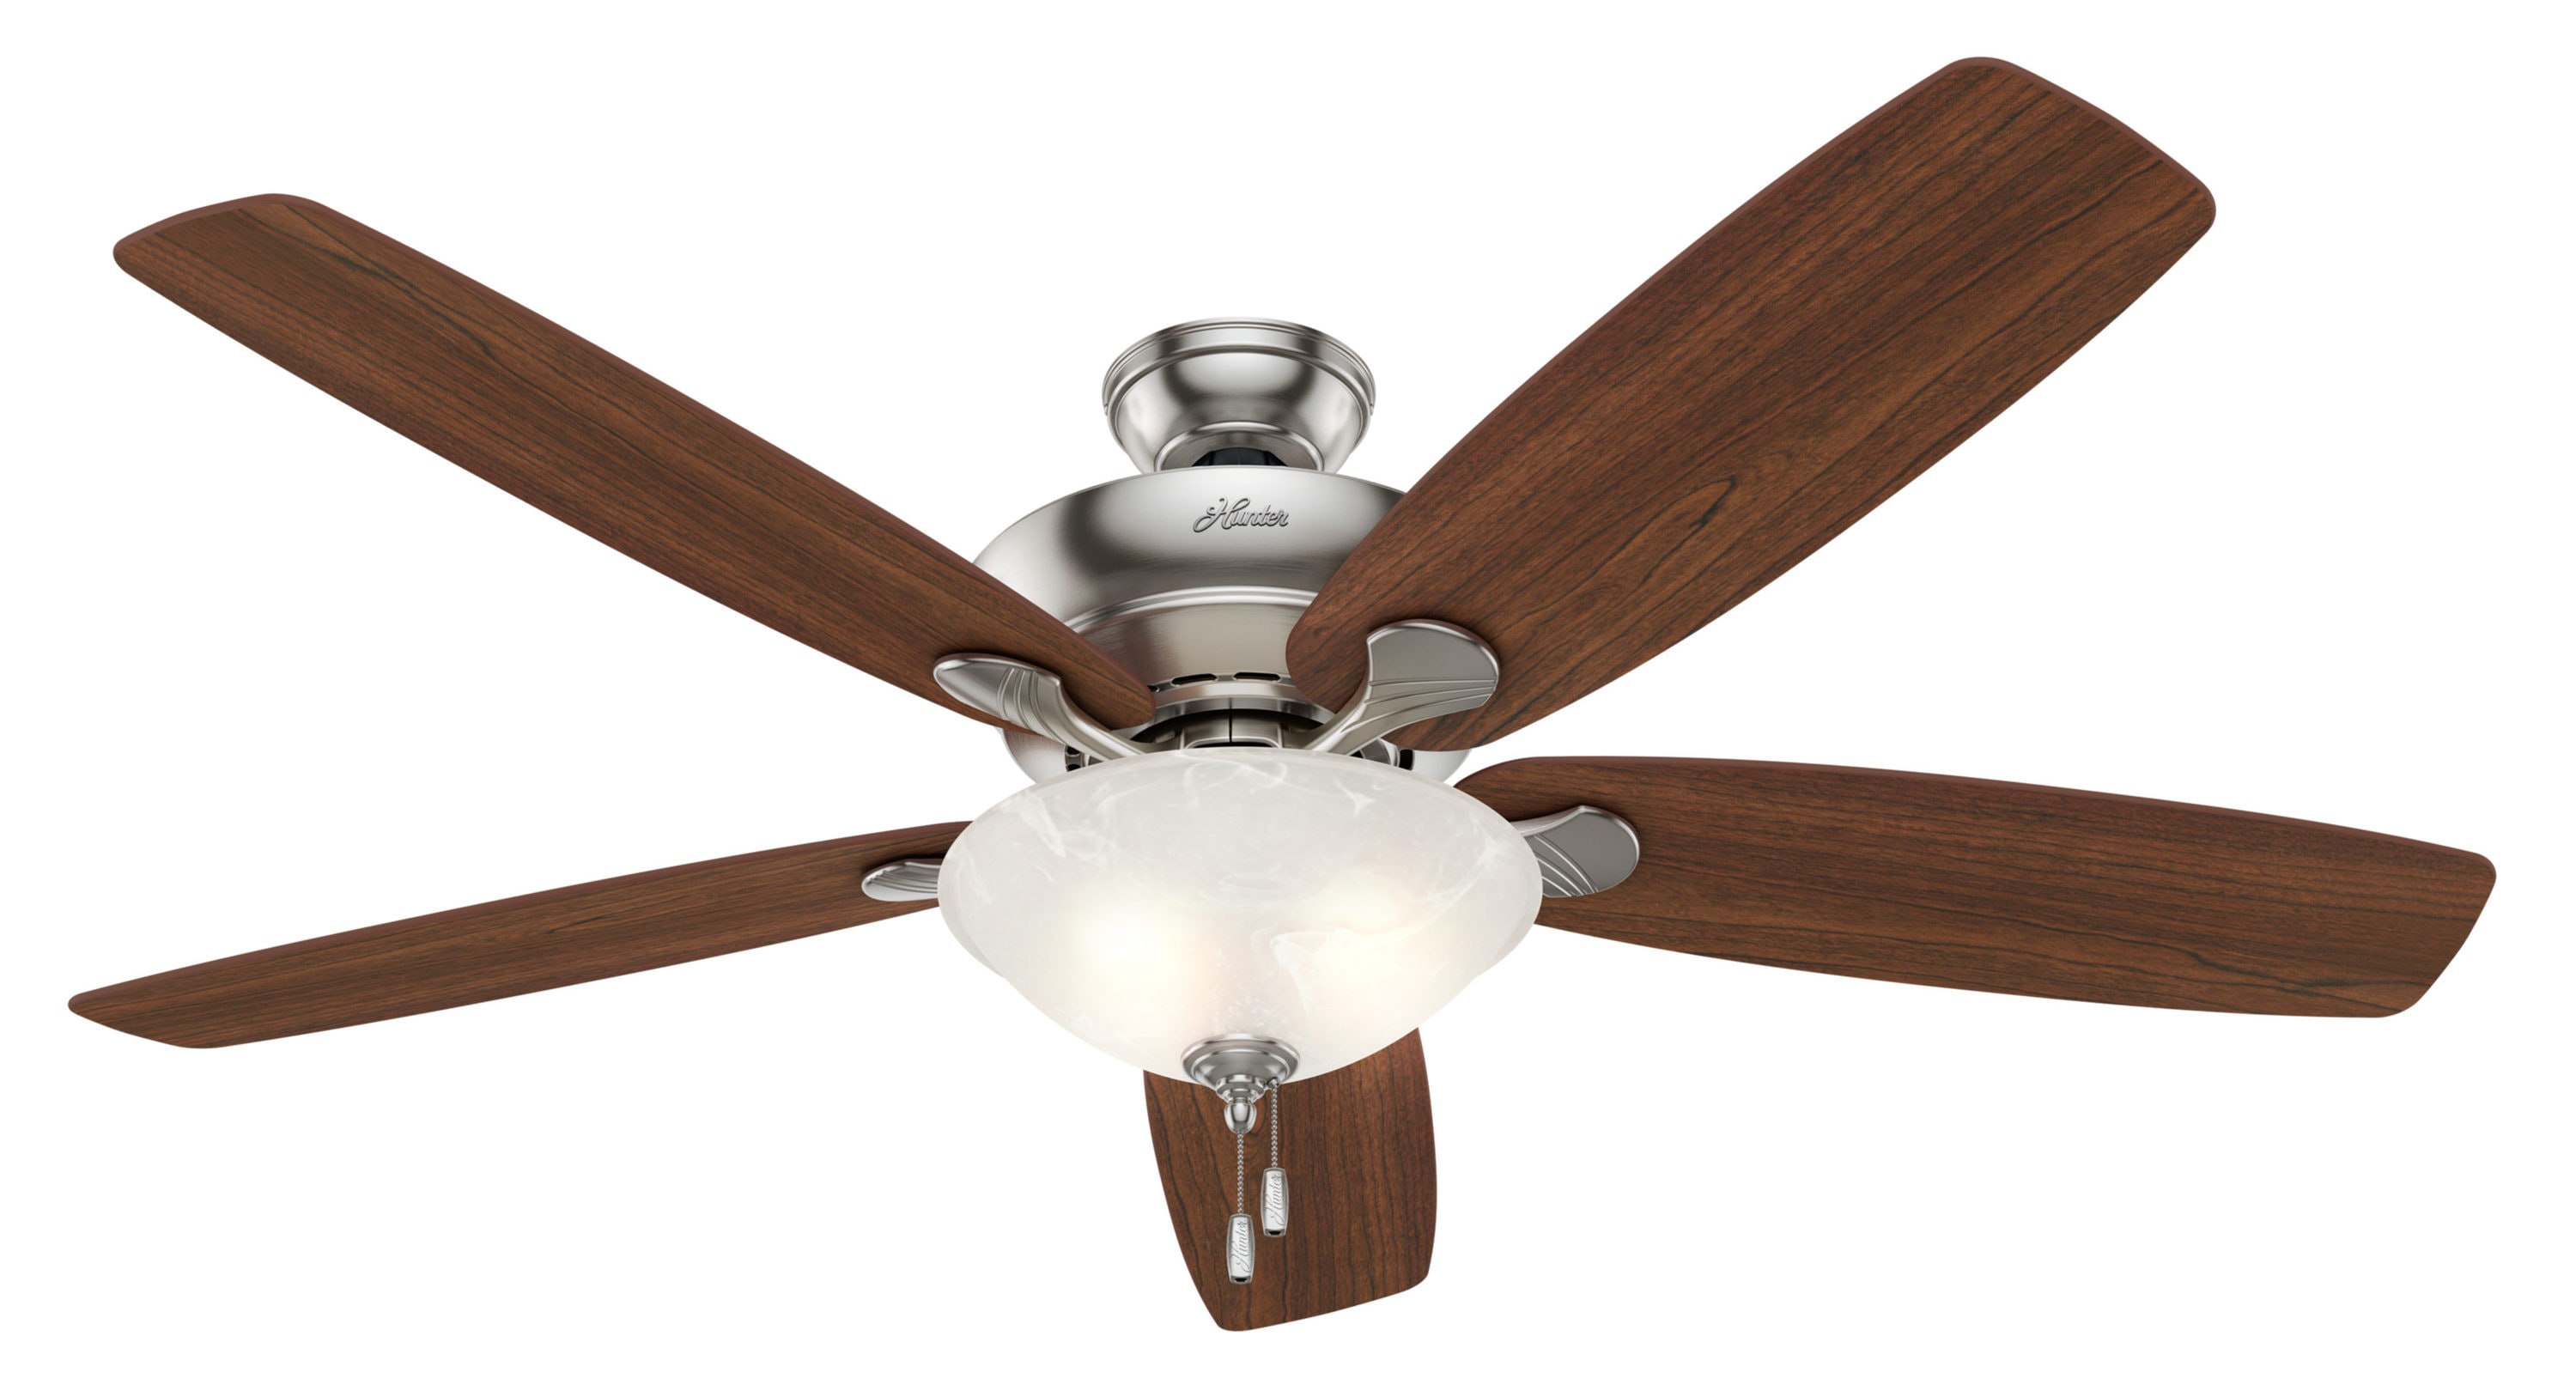 Hunter Regalia 60-in Brushed Light Nickel or at Fan Indoor with Mount (5-Blade) Ceiling Downrod Flush